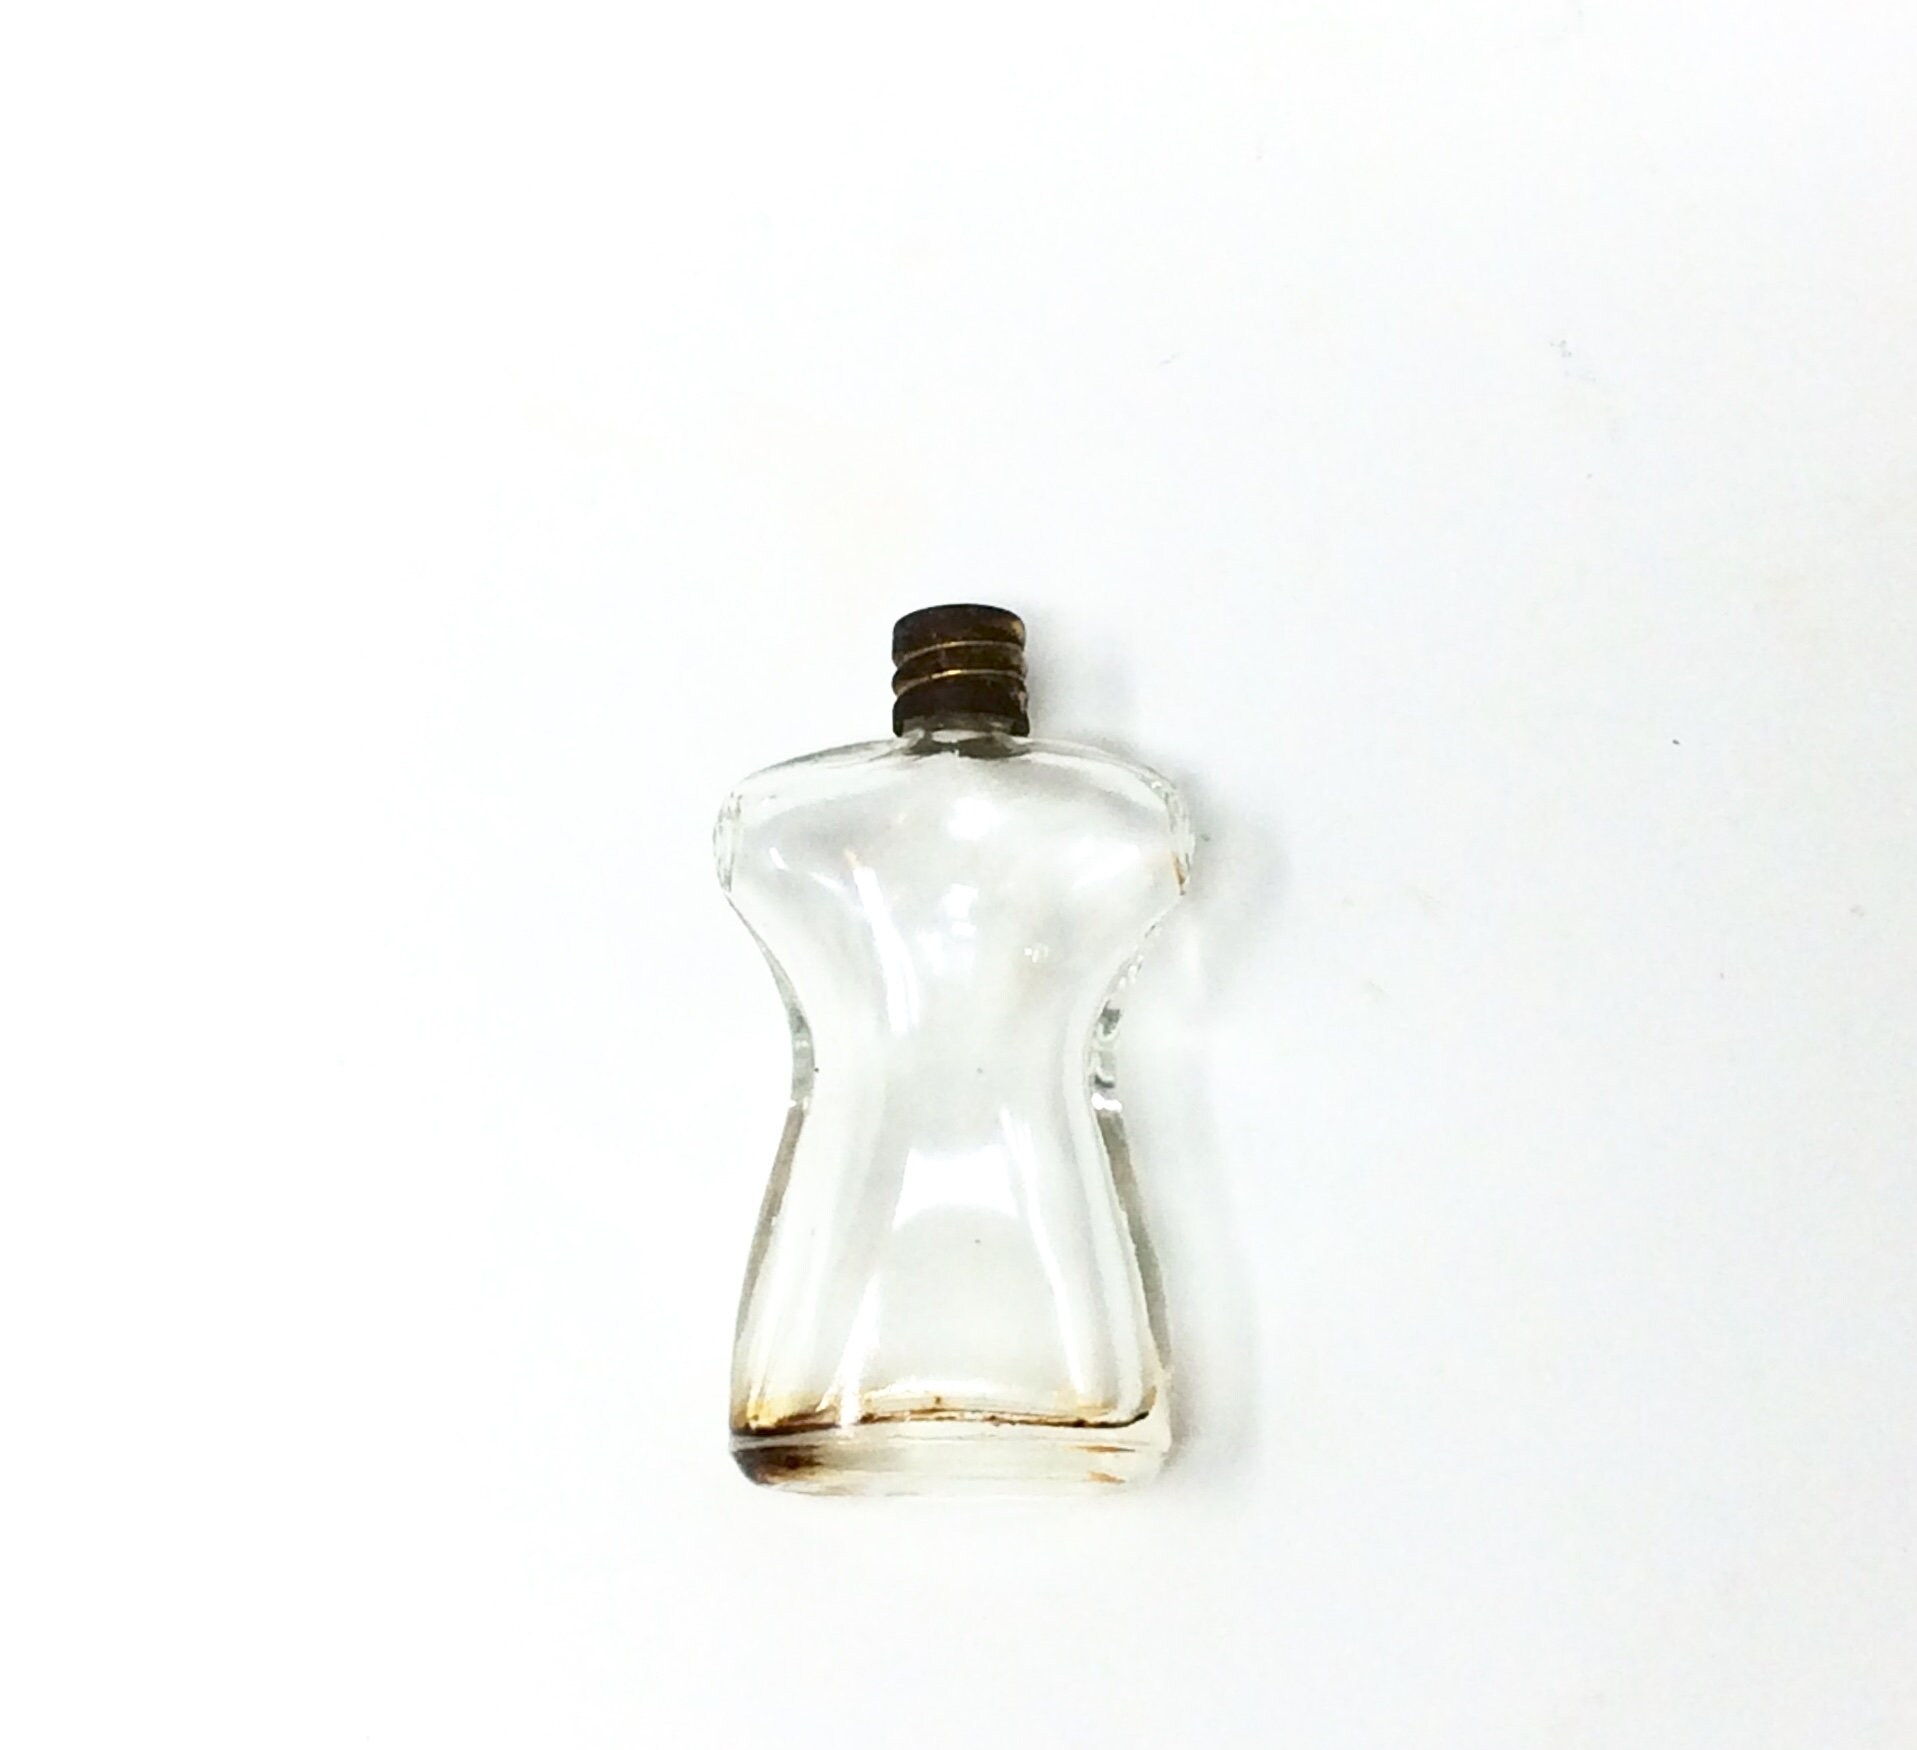 droopy-toad281: female perfume bottle